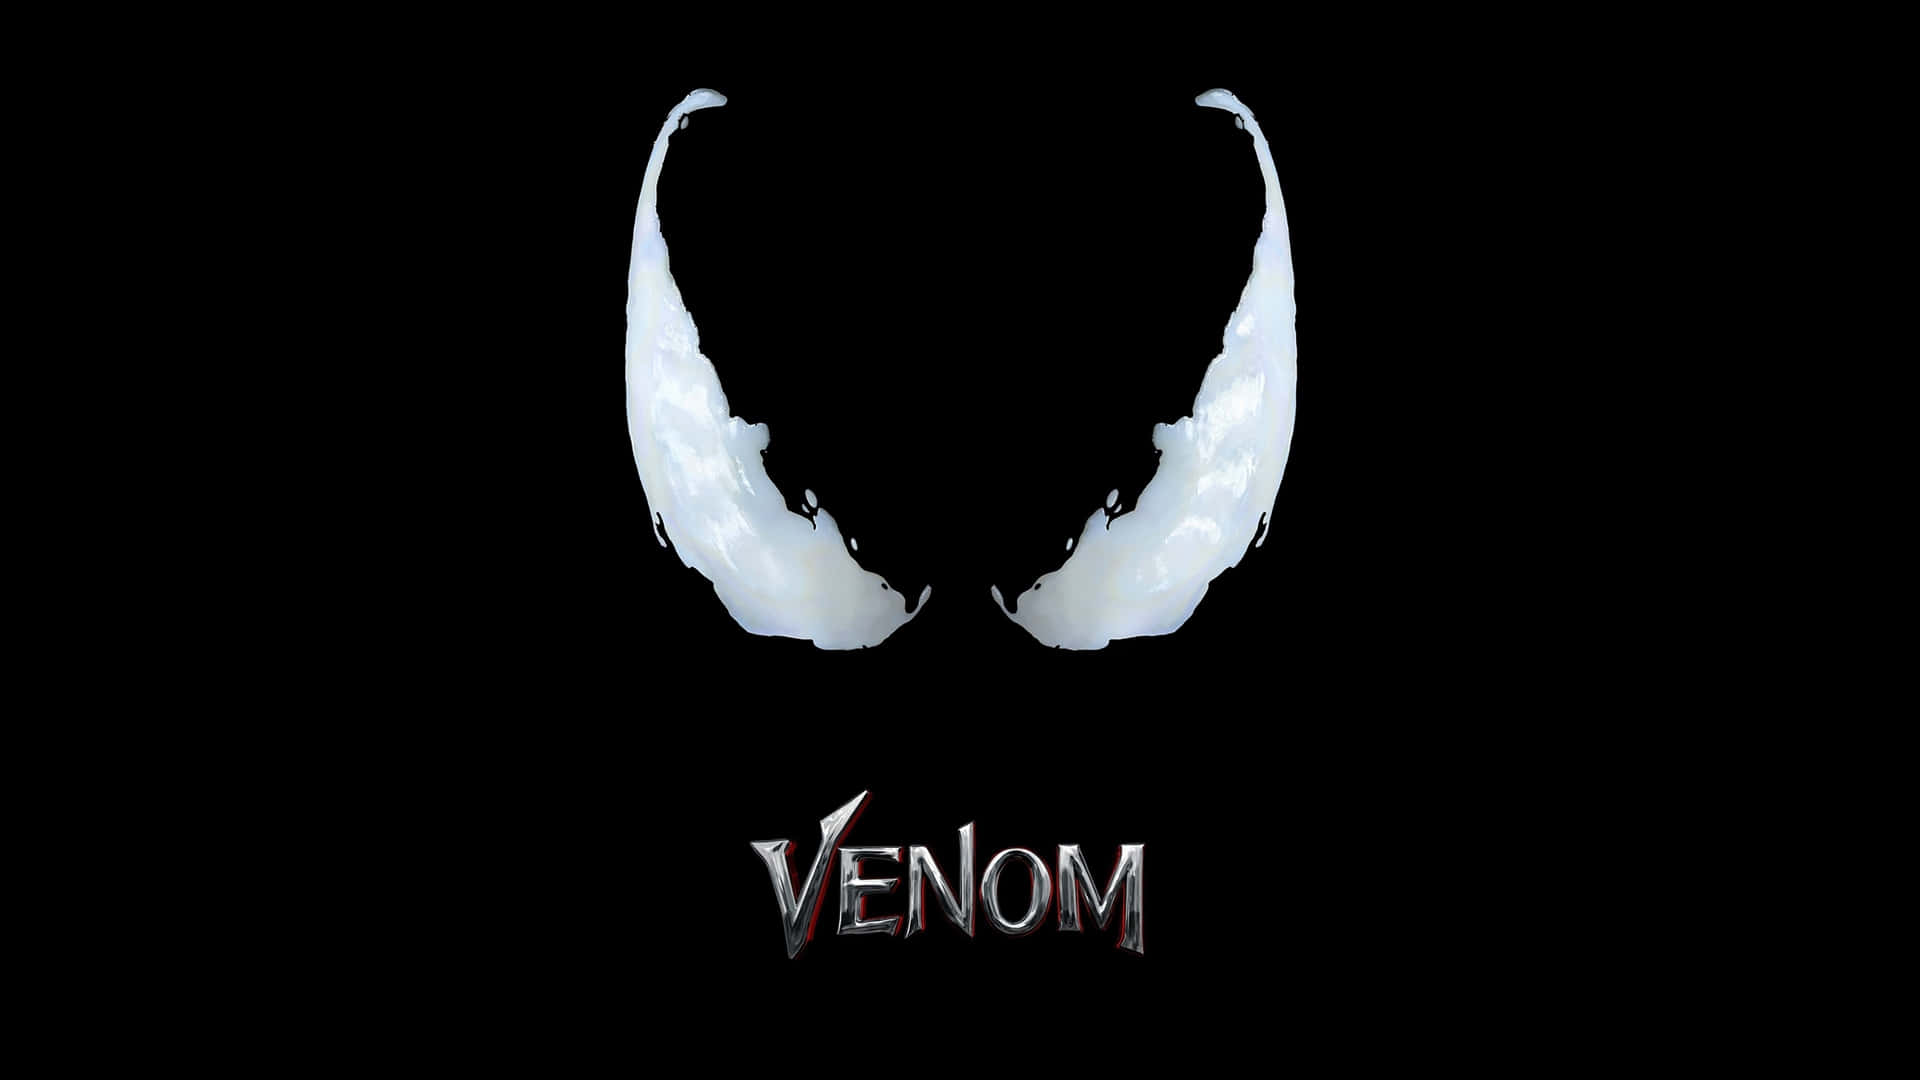 Strike fear in the heart of your enemies with Venom abstract artwork Wallpaper